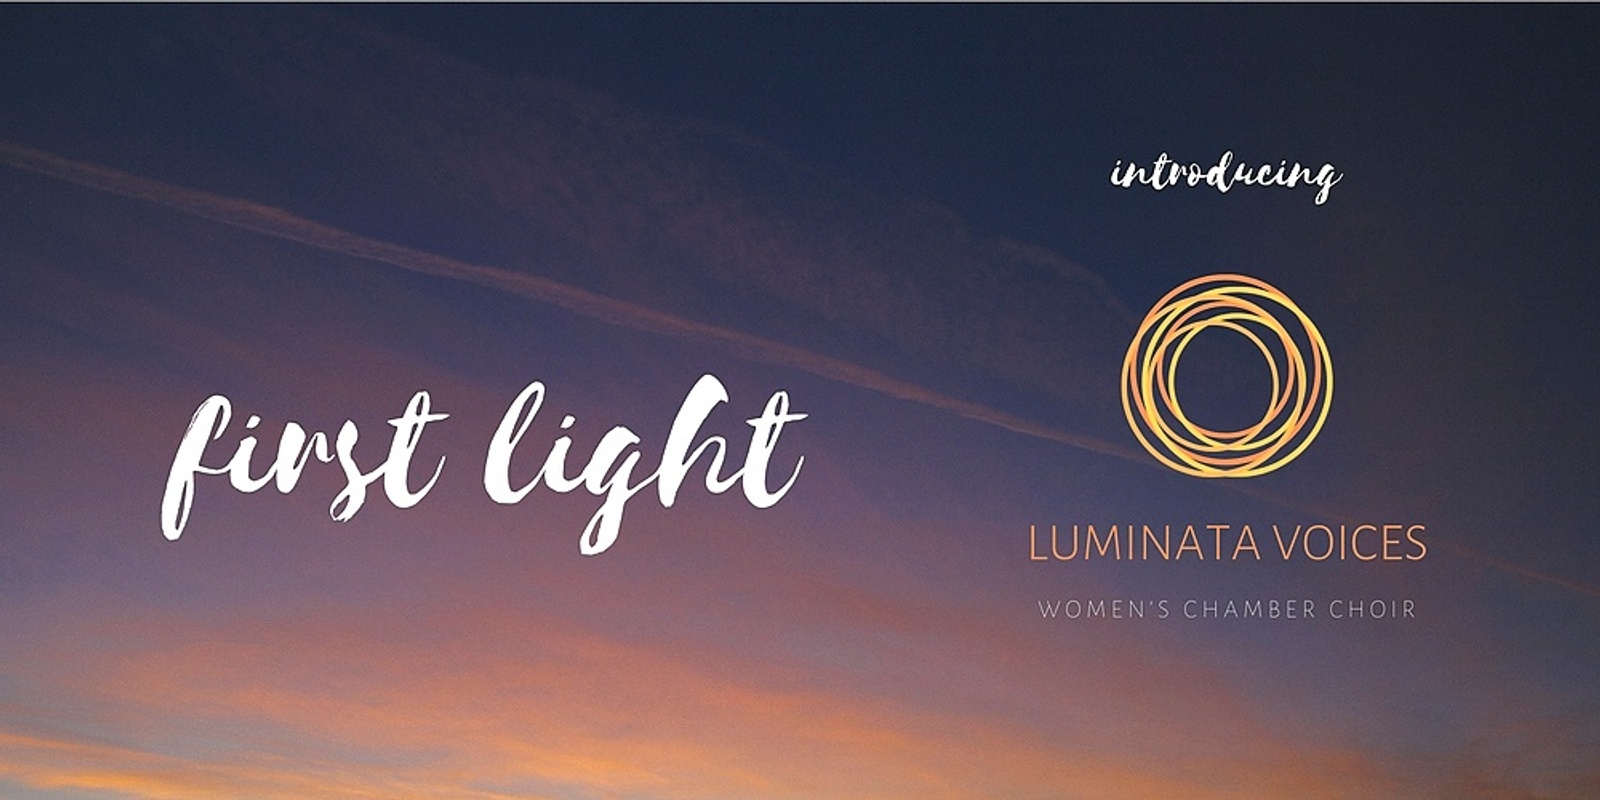 Banner image for First Light - Luminata Voices launch event